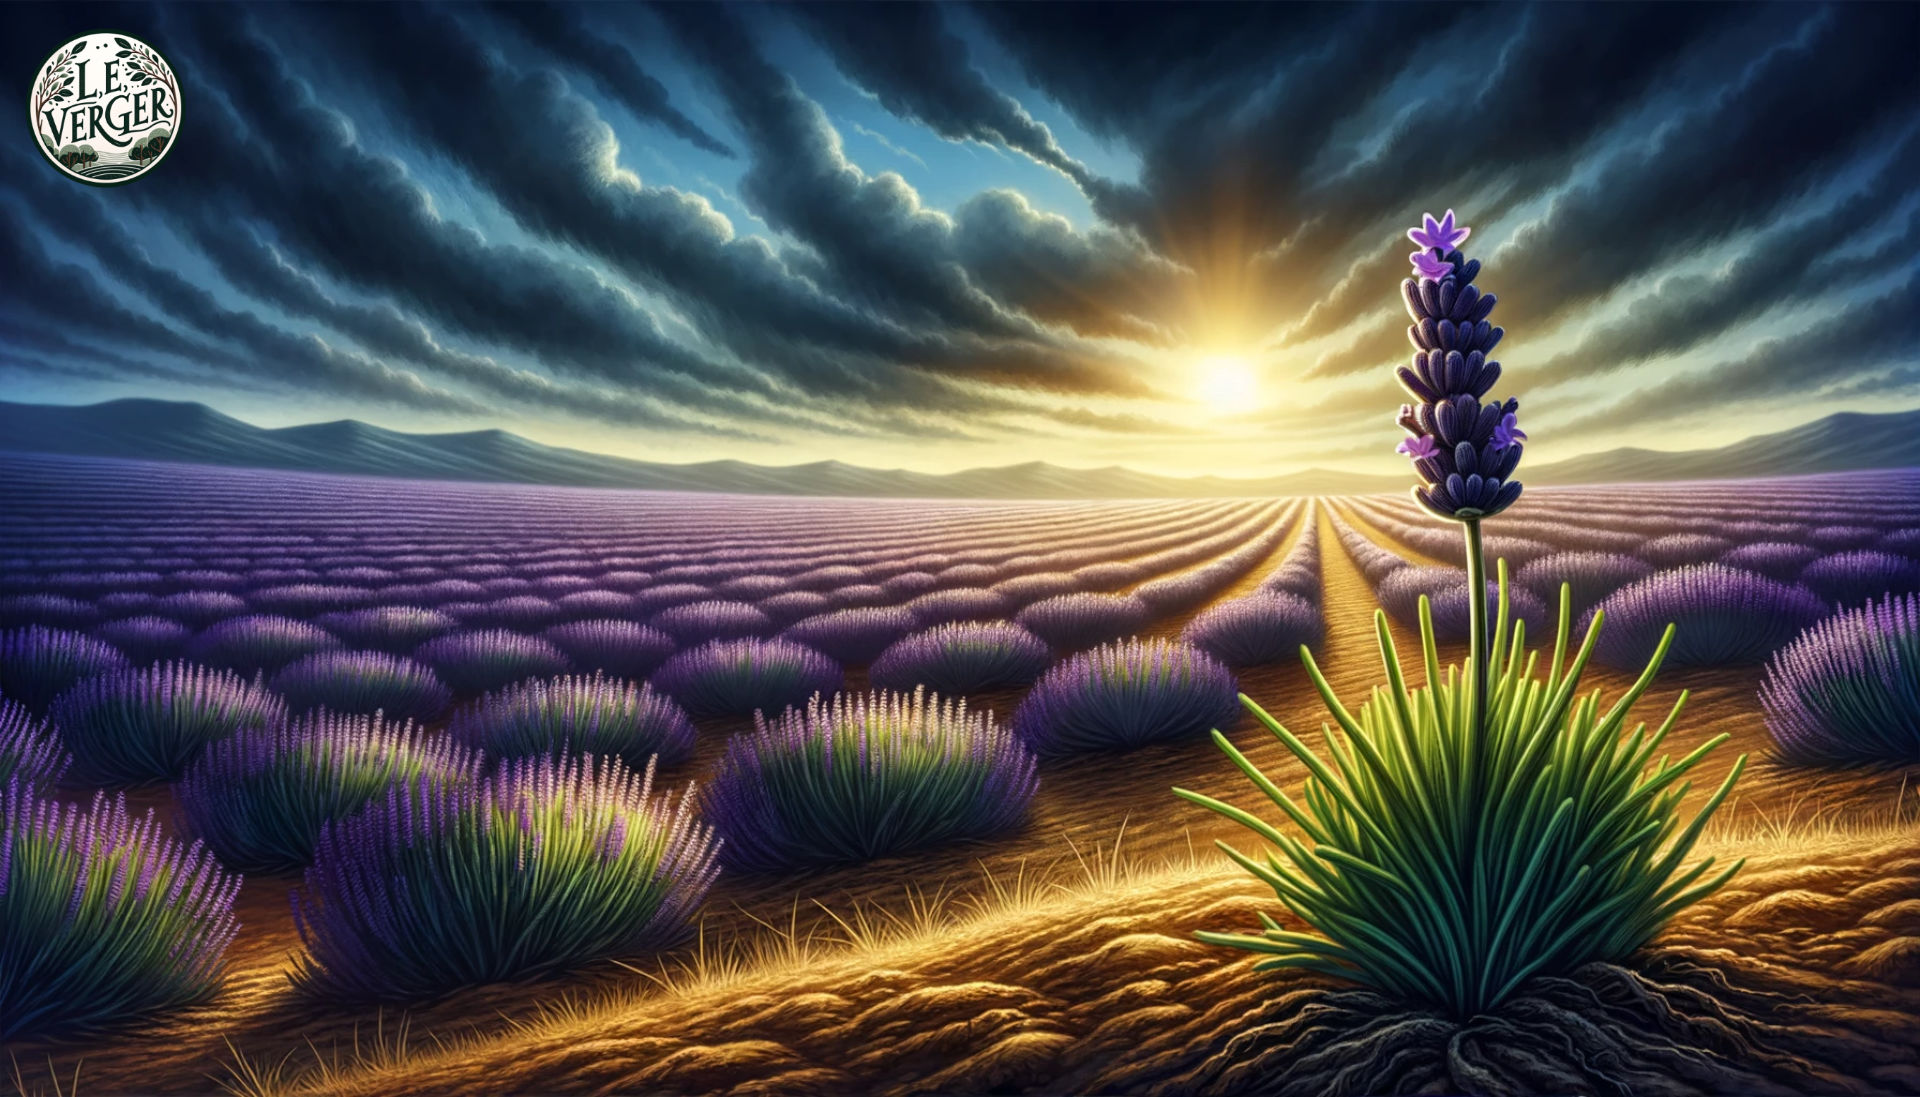 Illustration of a vast lavender field under a dramatic sky. In the foreground, a single lavender plant stands taller than the rest, showcasing its strength and endurance amidst adversity.